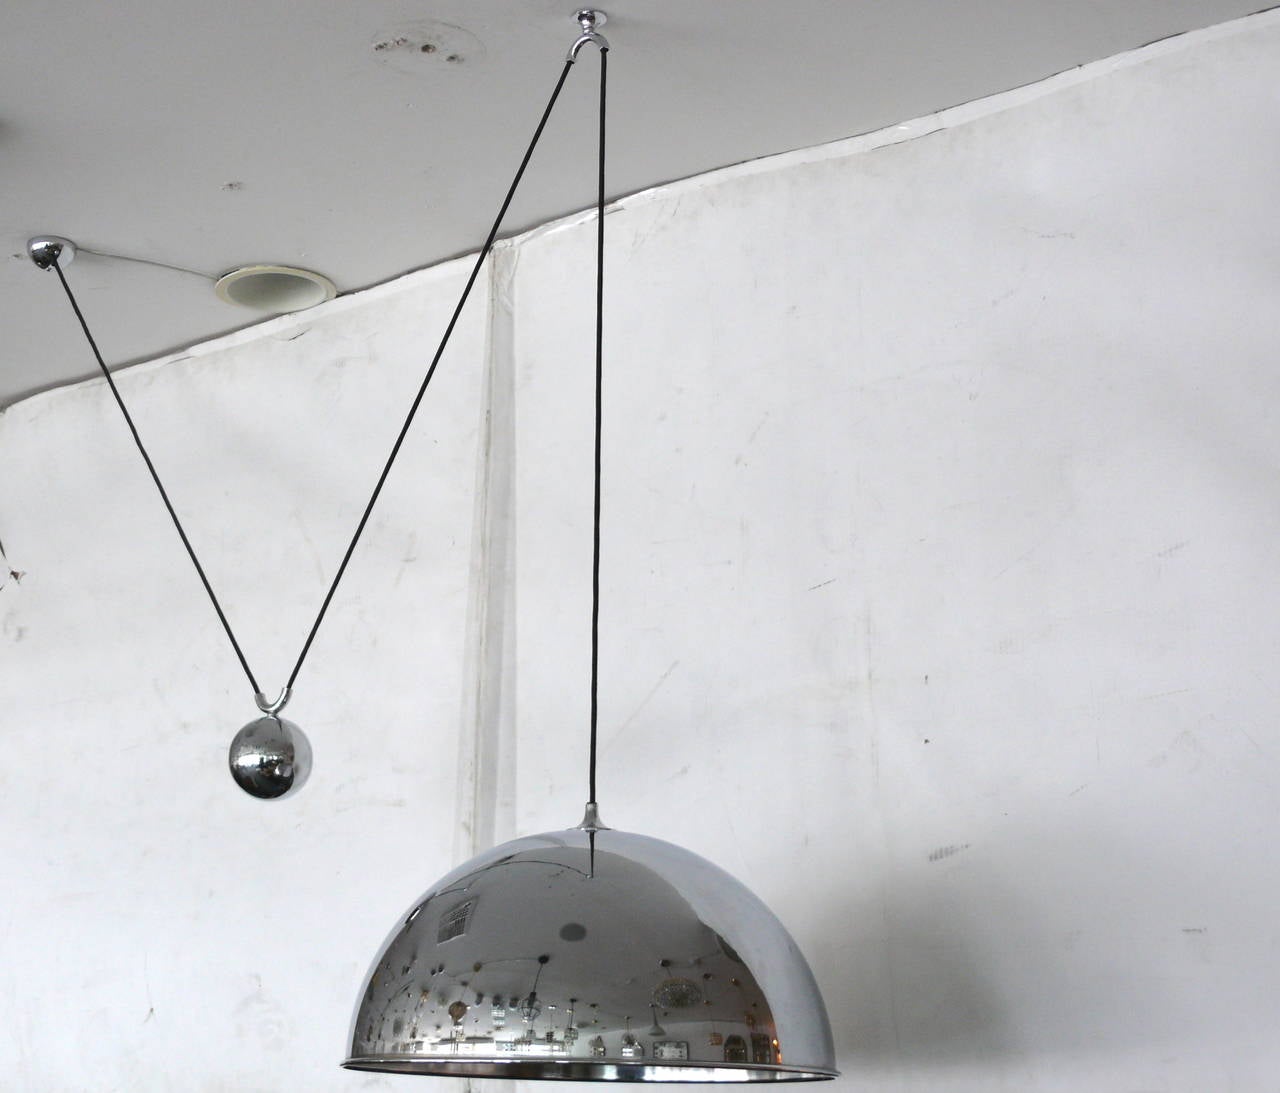 Large nickel counter balance light by Florian Schulz. Impressive dome pendant cloth cord with heavy ball counterbalance. Light is height adjustable. Excellent vintage condition.